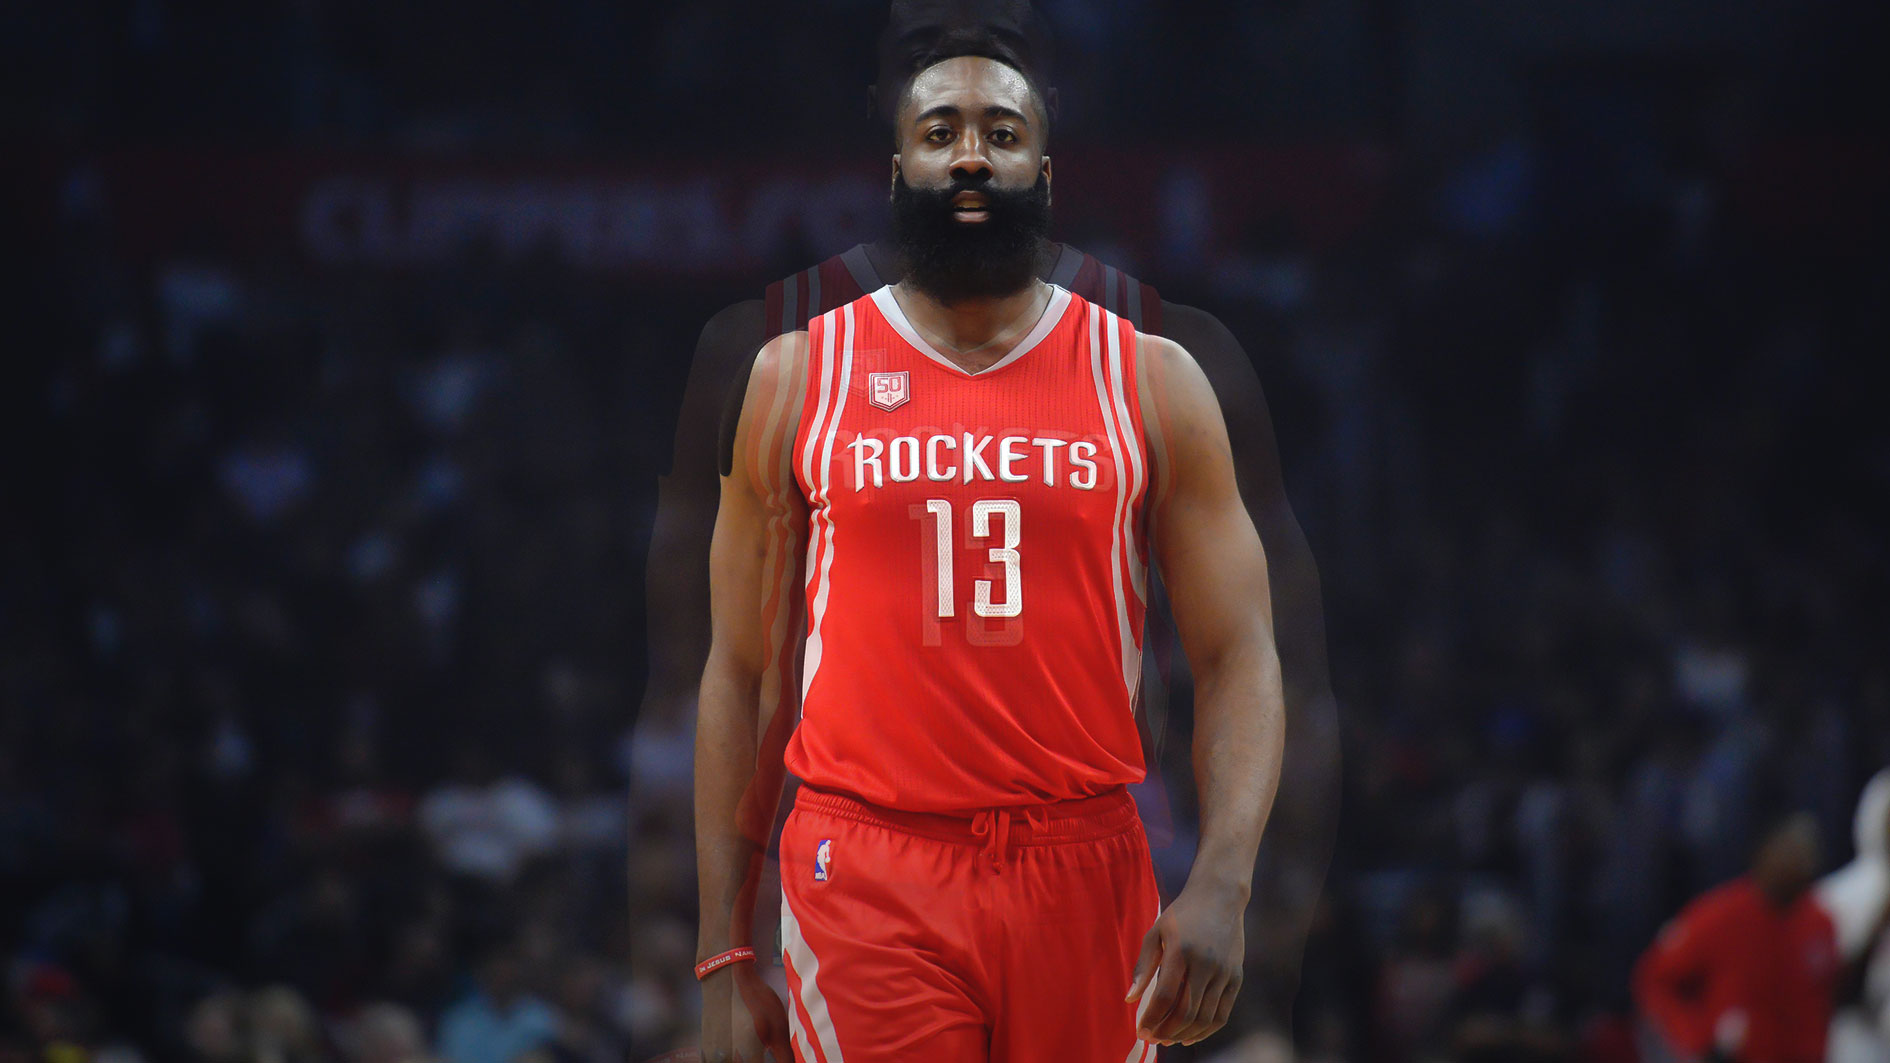 Rockets news: James Harden says Houston cannot get comfortable yet